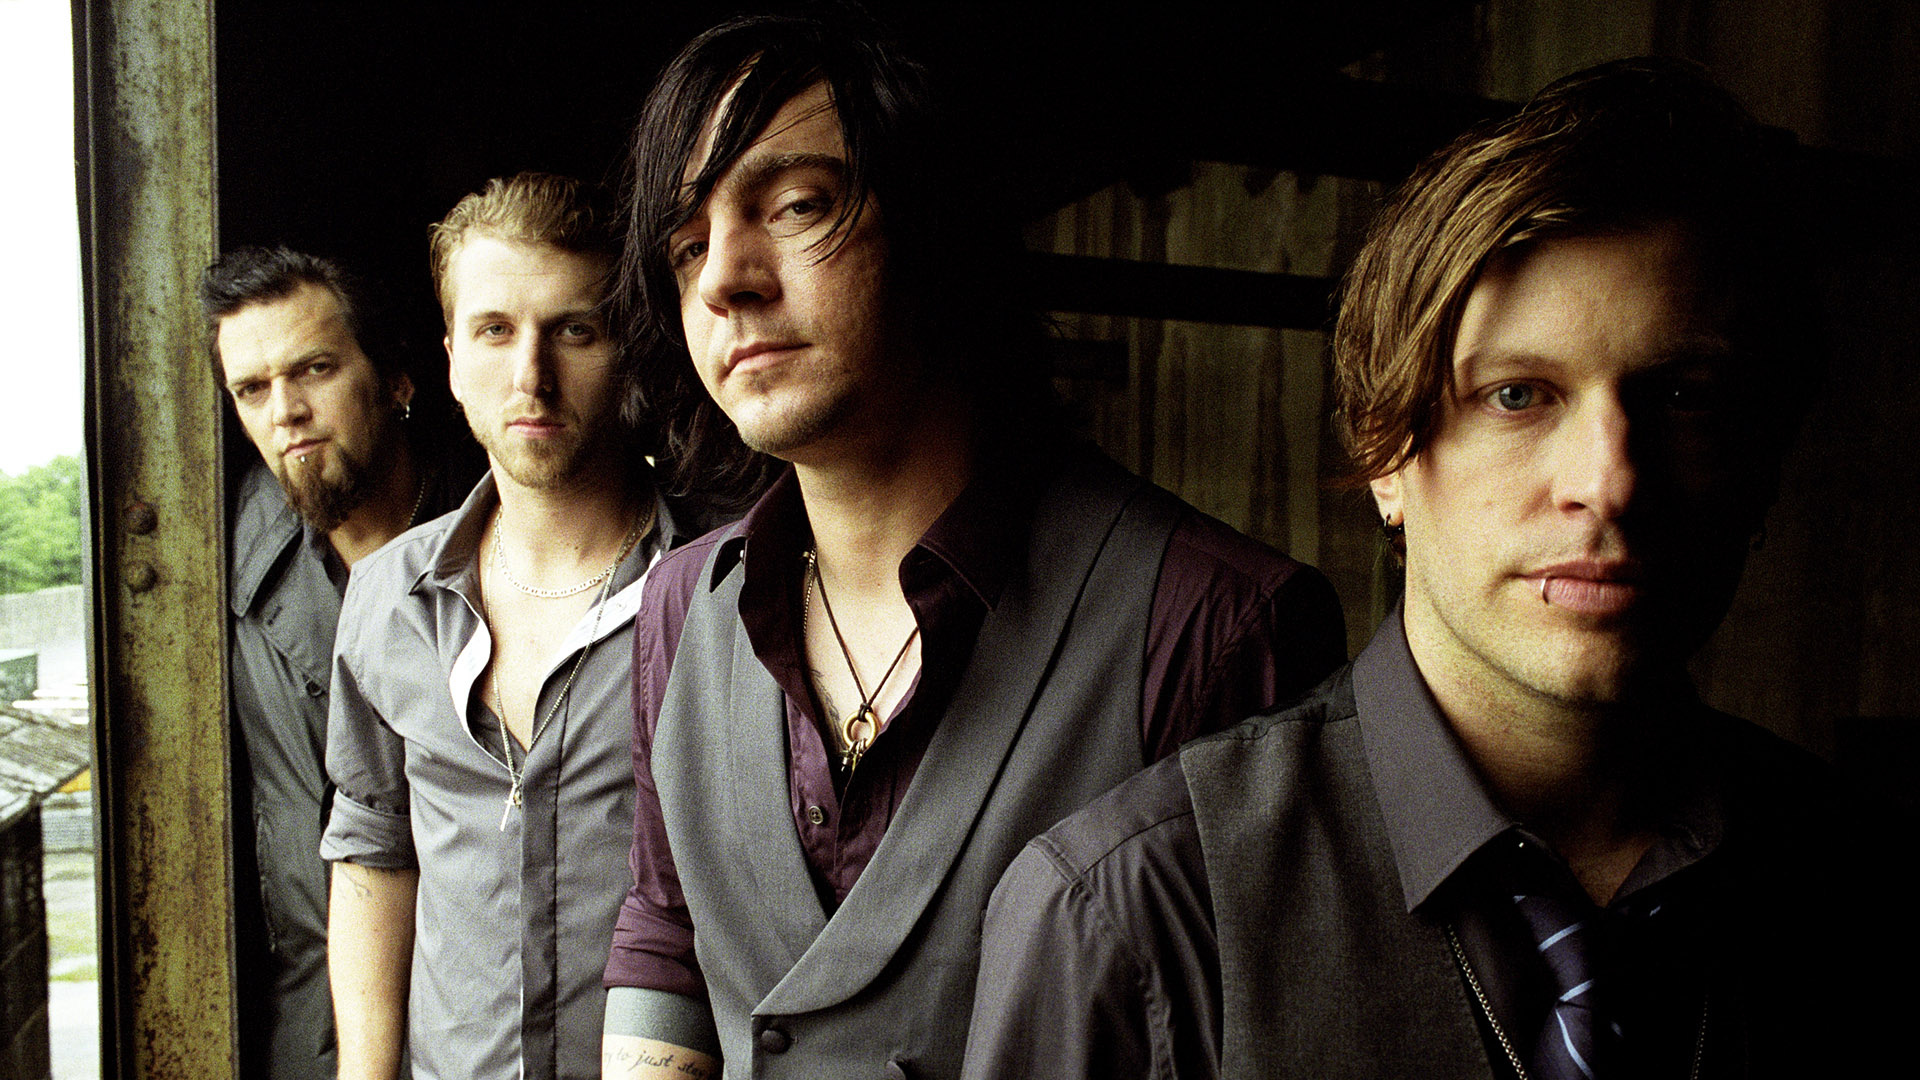 Three Days Grace: The third album, Life Starts Now, Release: September 22, 2009. 1920x1080 Full HD Wallpaper.